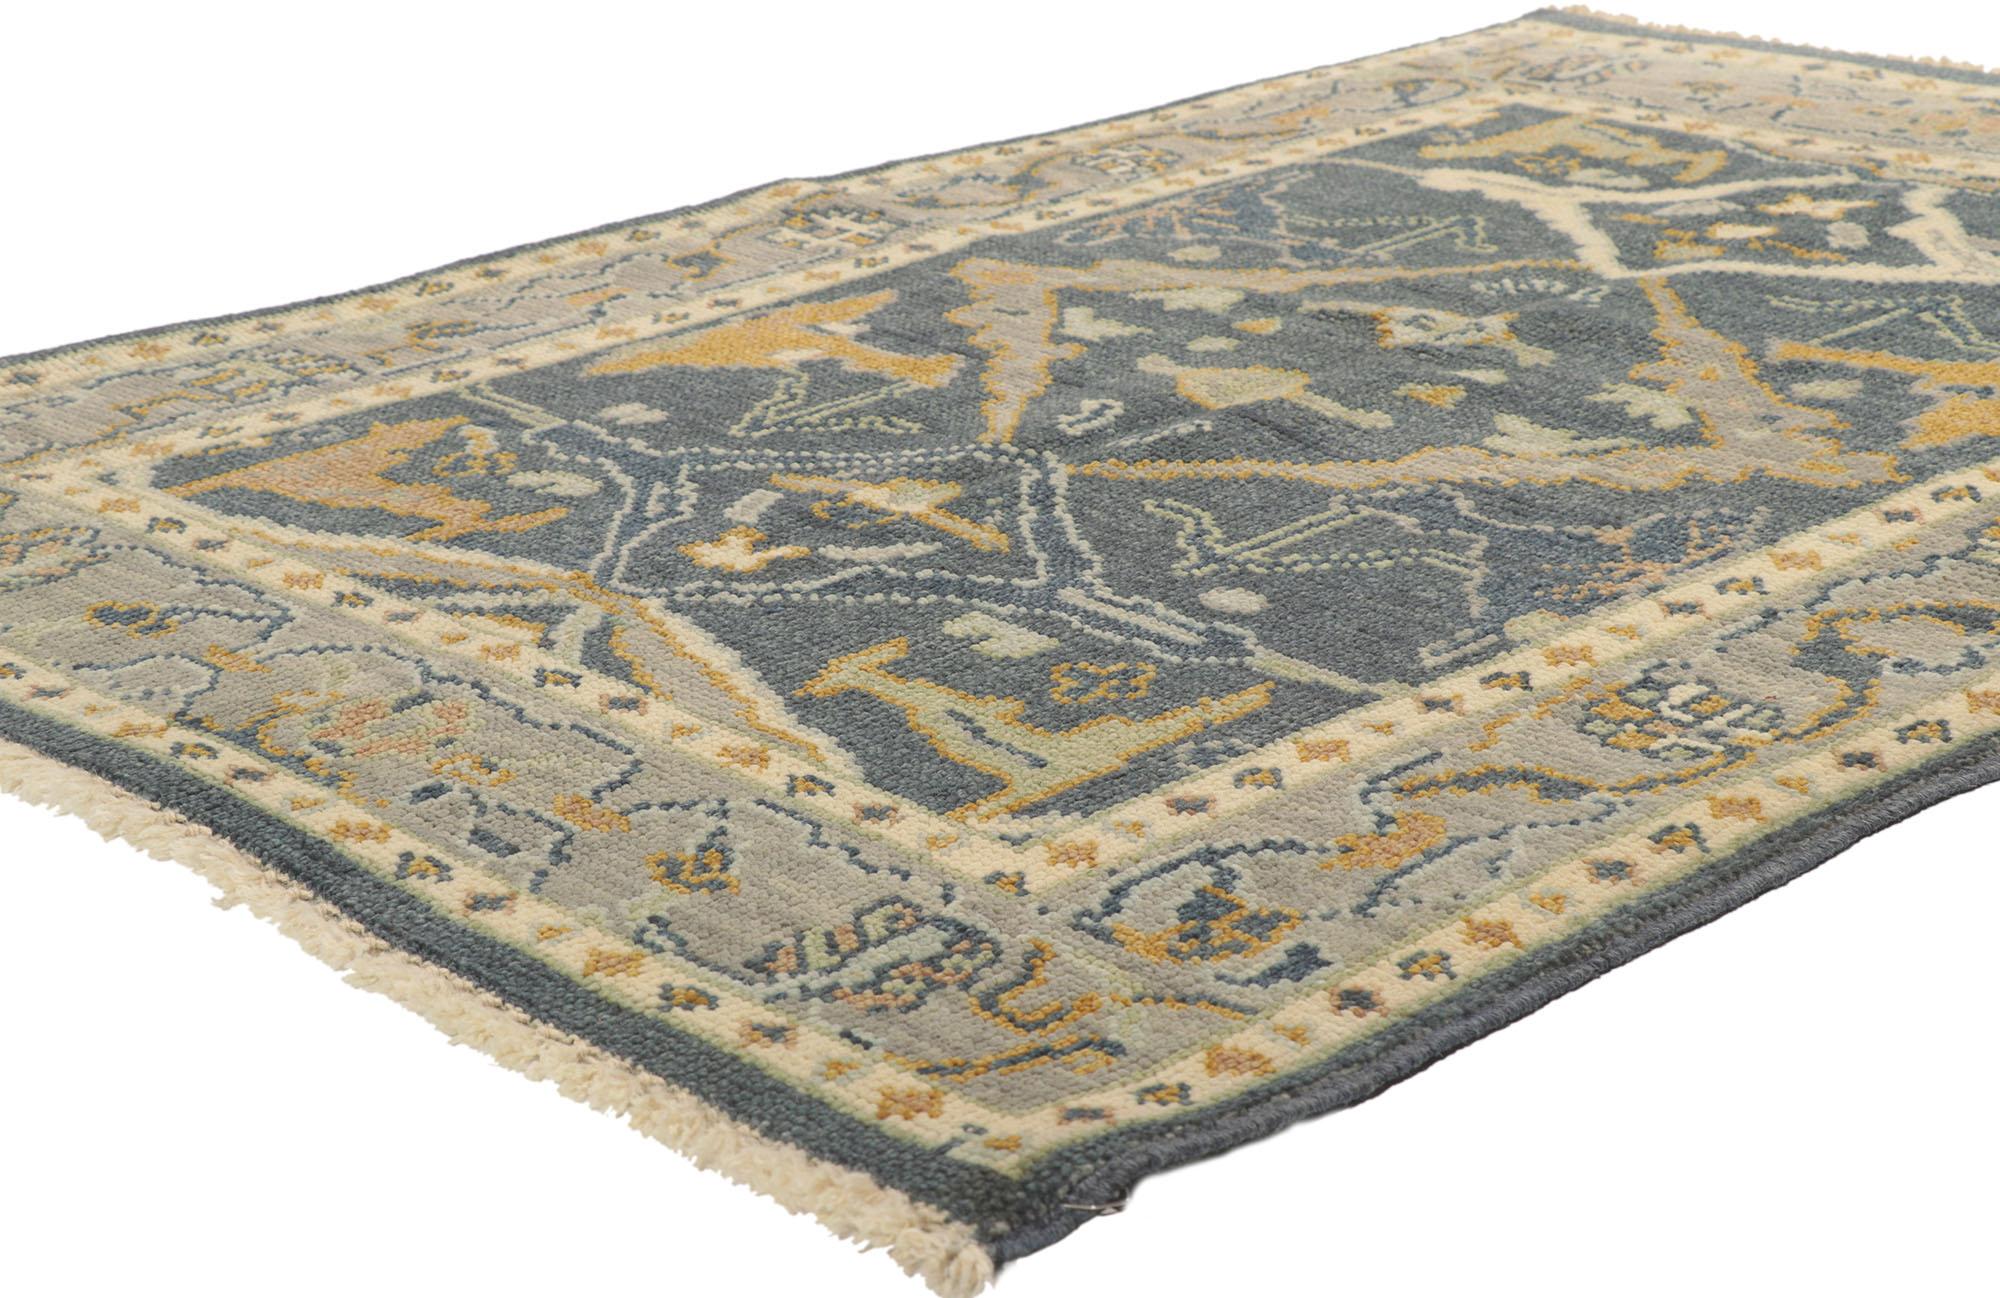 80692 New Contemporary Oushak rug with modern style 04'01 x 05'10. With its timeless design and sophisticated elegance, this hand-knotted wool small Oushak rug beautifully embodies a modern style. The abrashed blue-gray field features a botanical